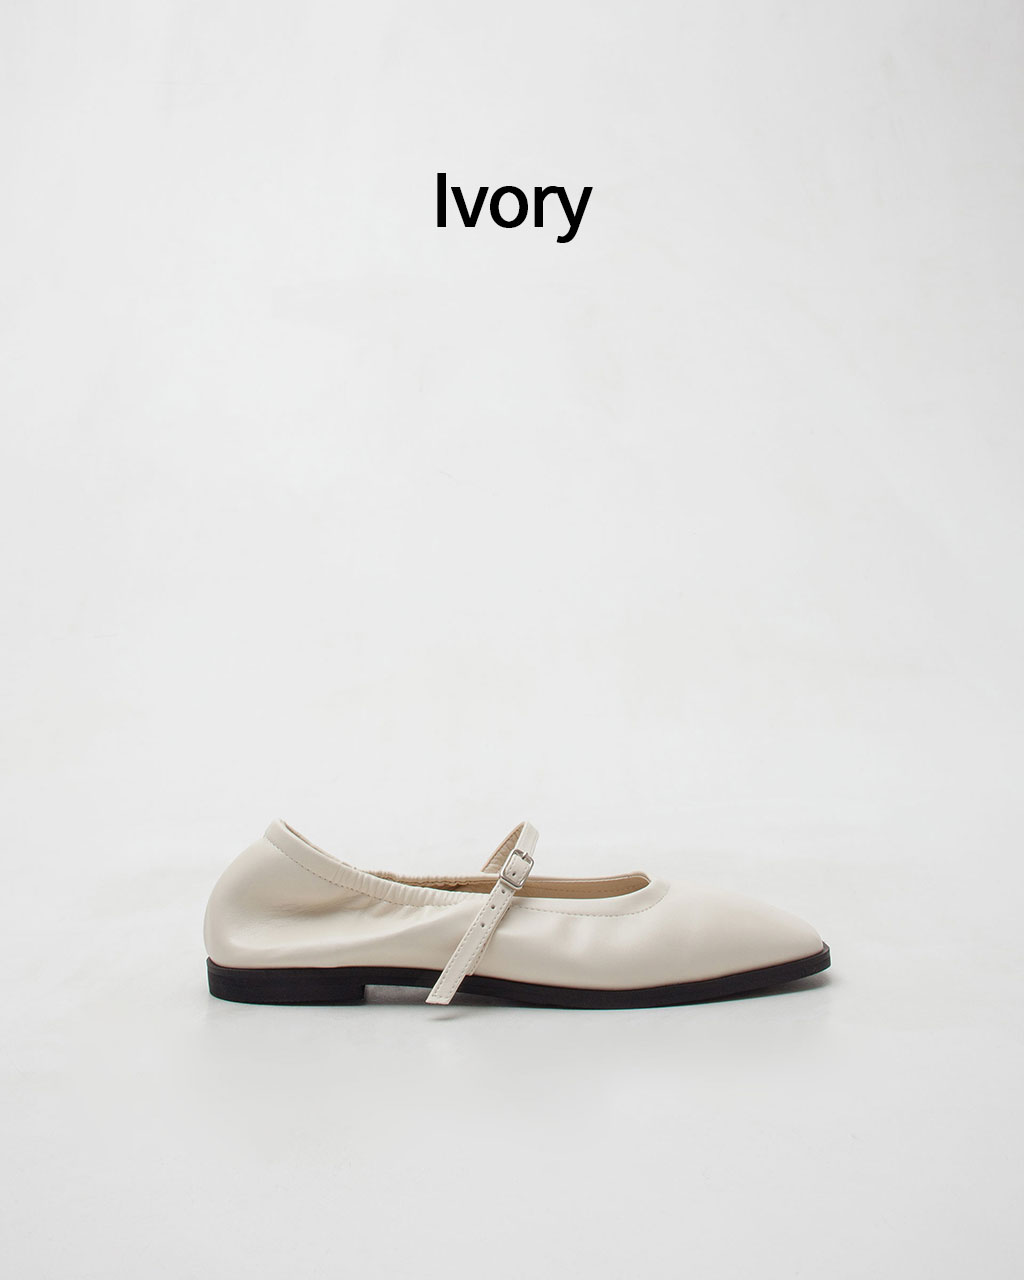 Tagtraume Lily-004 - Ivory(아이보리)